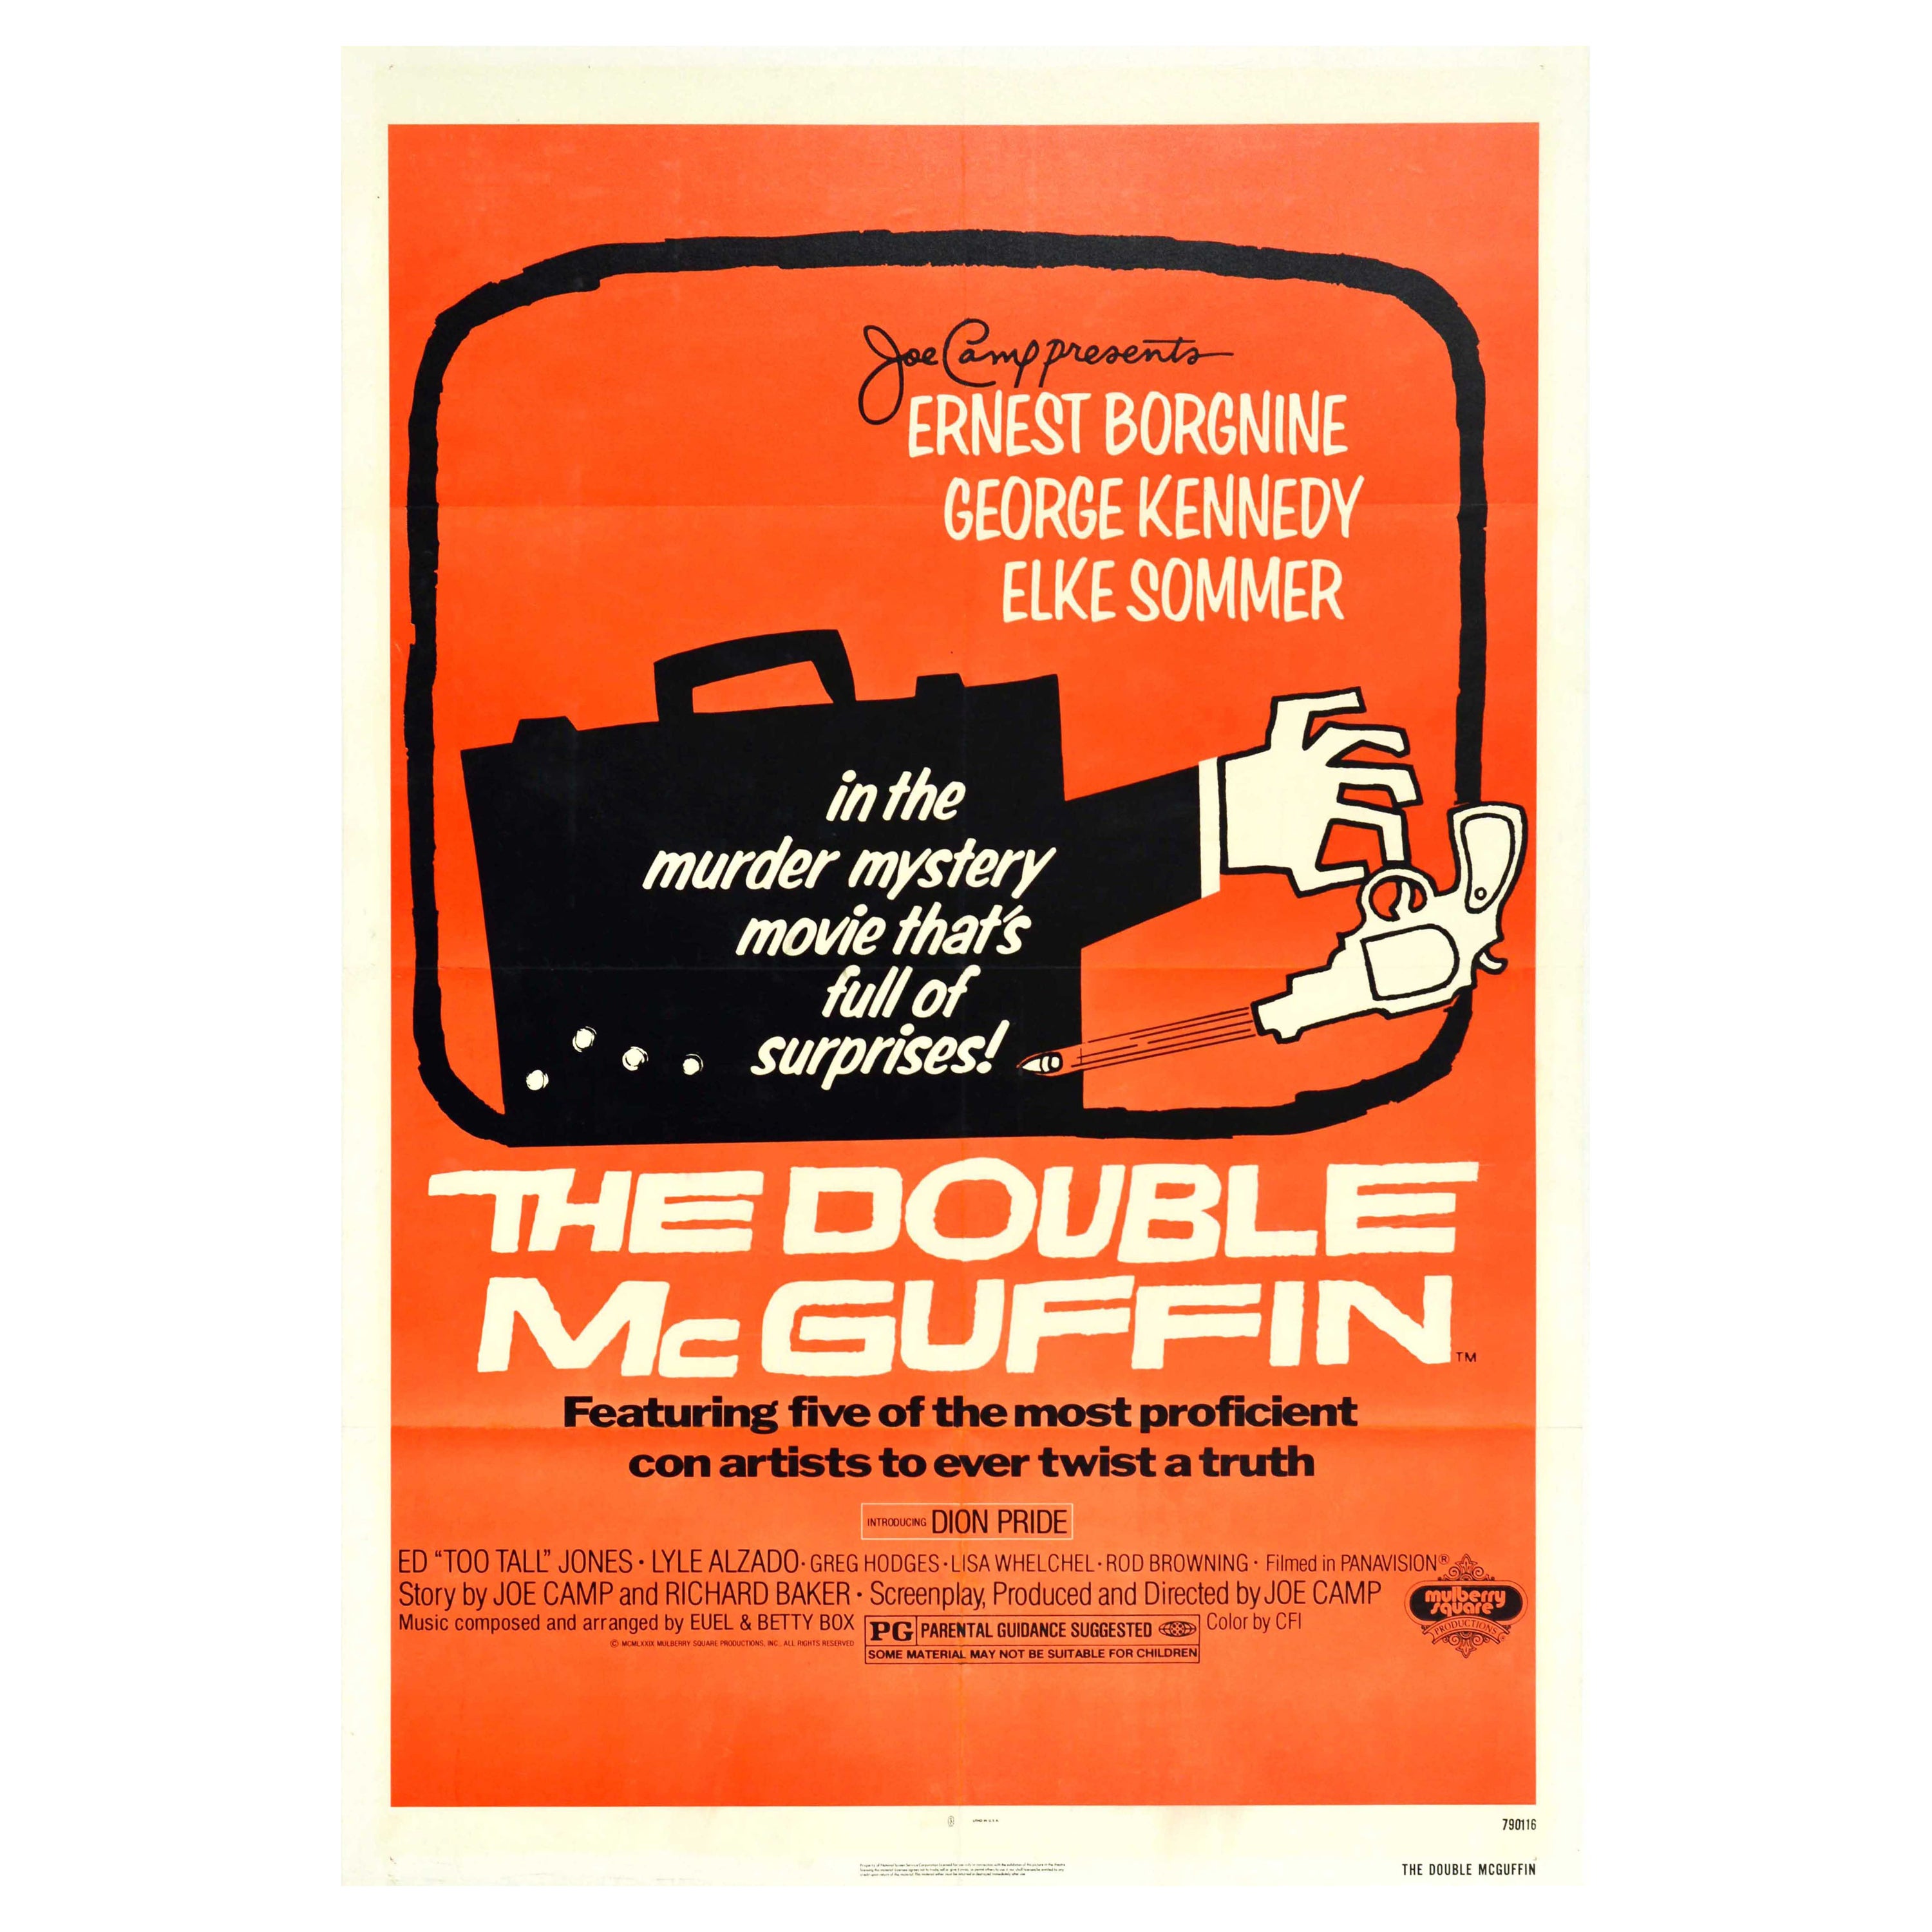 Original-Vintage-Poster „The Double McGuffin Con Artists“, Mystery-Film